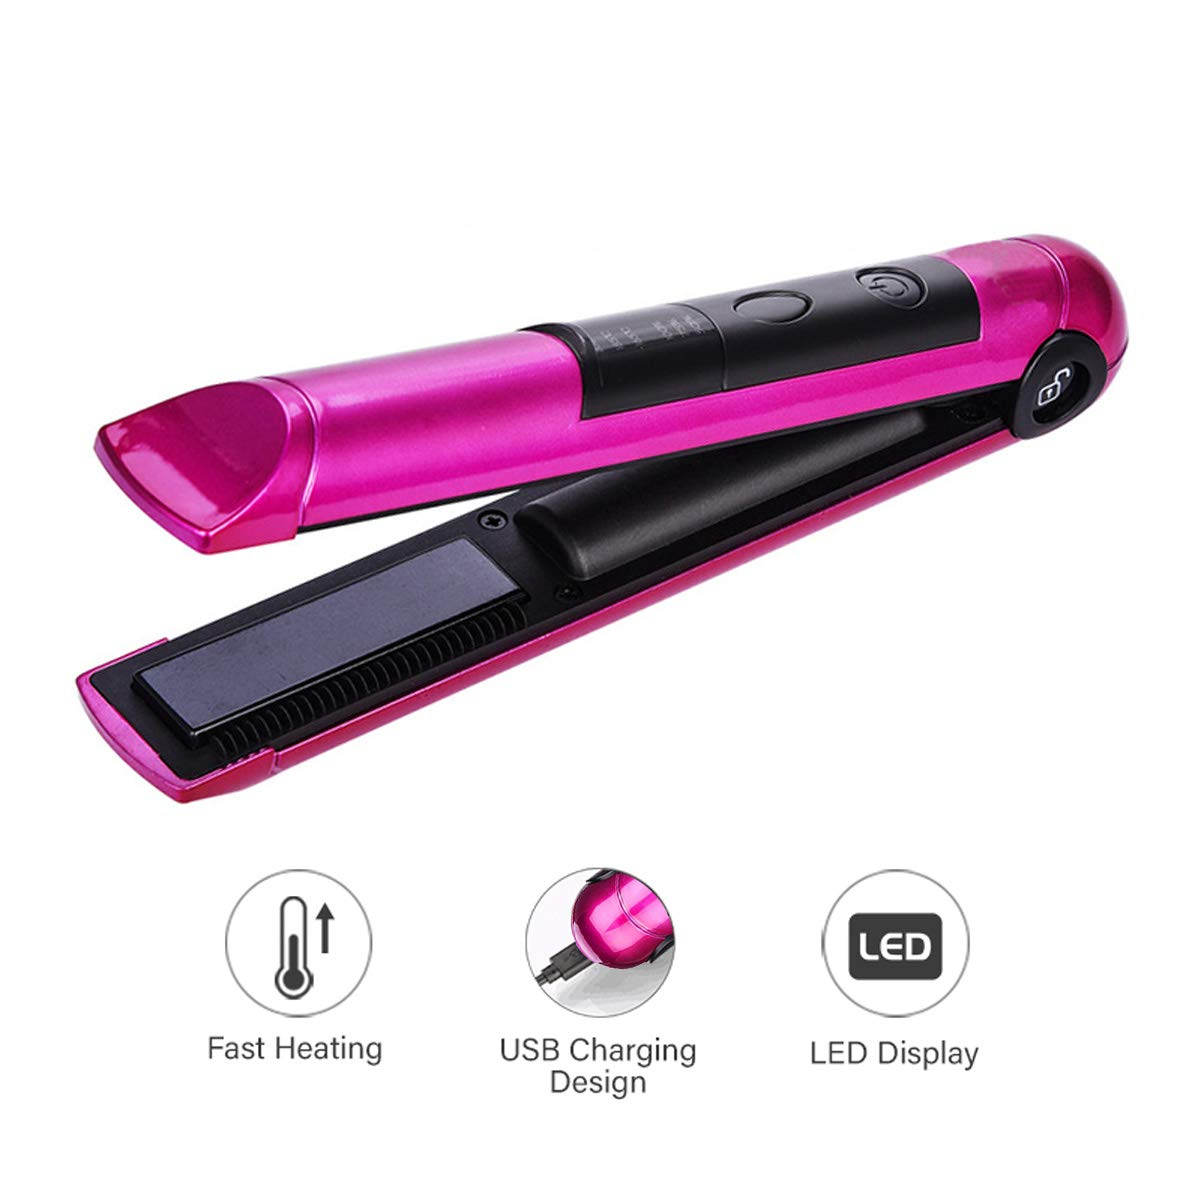 Pritech Wireless Hair Straightener Mini Portable Travel Flat Iron USB Charging is 
10 Best Hair Straighteners in Singapore for Smooth Hair, Which brand of hair straightener is the best?,What are the top 5 hair straighteners?,What are the top 10 hair straighteners?,Which hair straightener is best in Singapore?, best hair straighteners singapore,hair straightener comb singapore,ghd hair straightener singapore,where to buy hair straightener in singapore,philips hair straightener,cheap but good hair straighteners,hair straightener review,
panasonic hair straightener, Which hair straightener is best for thick hair?